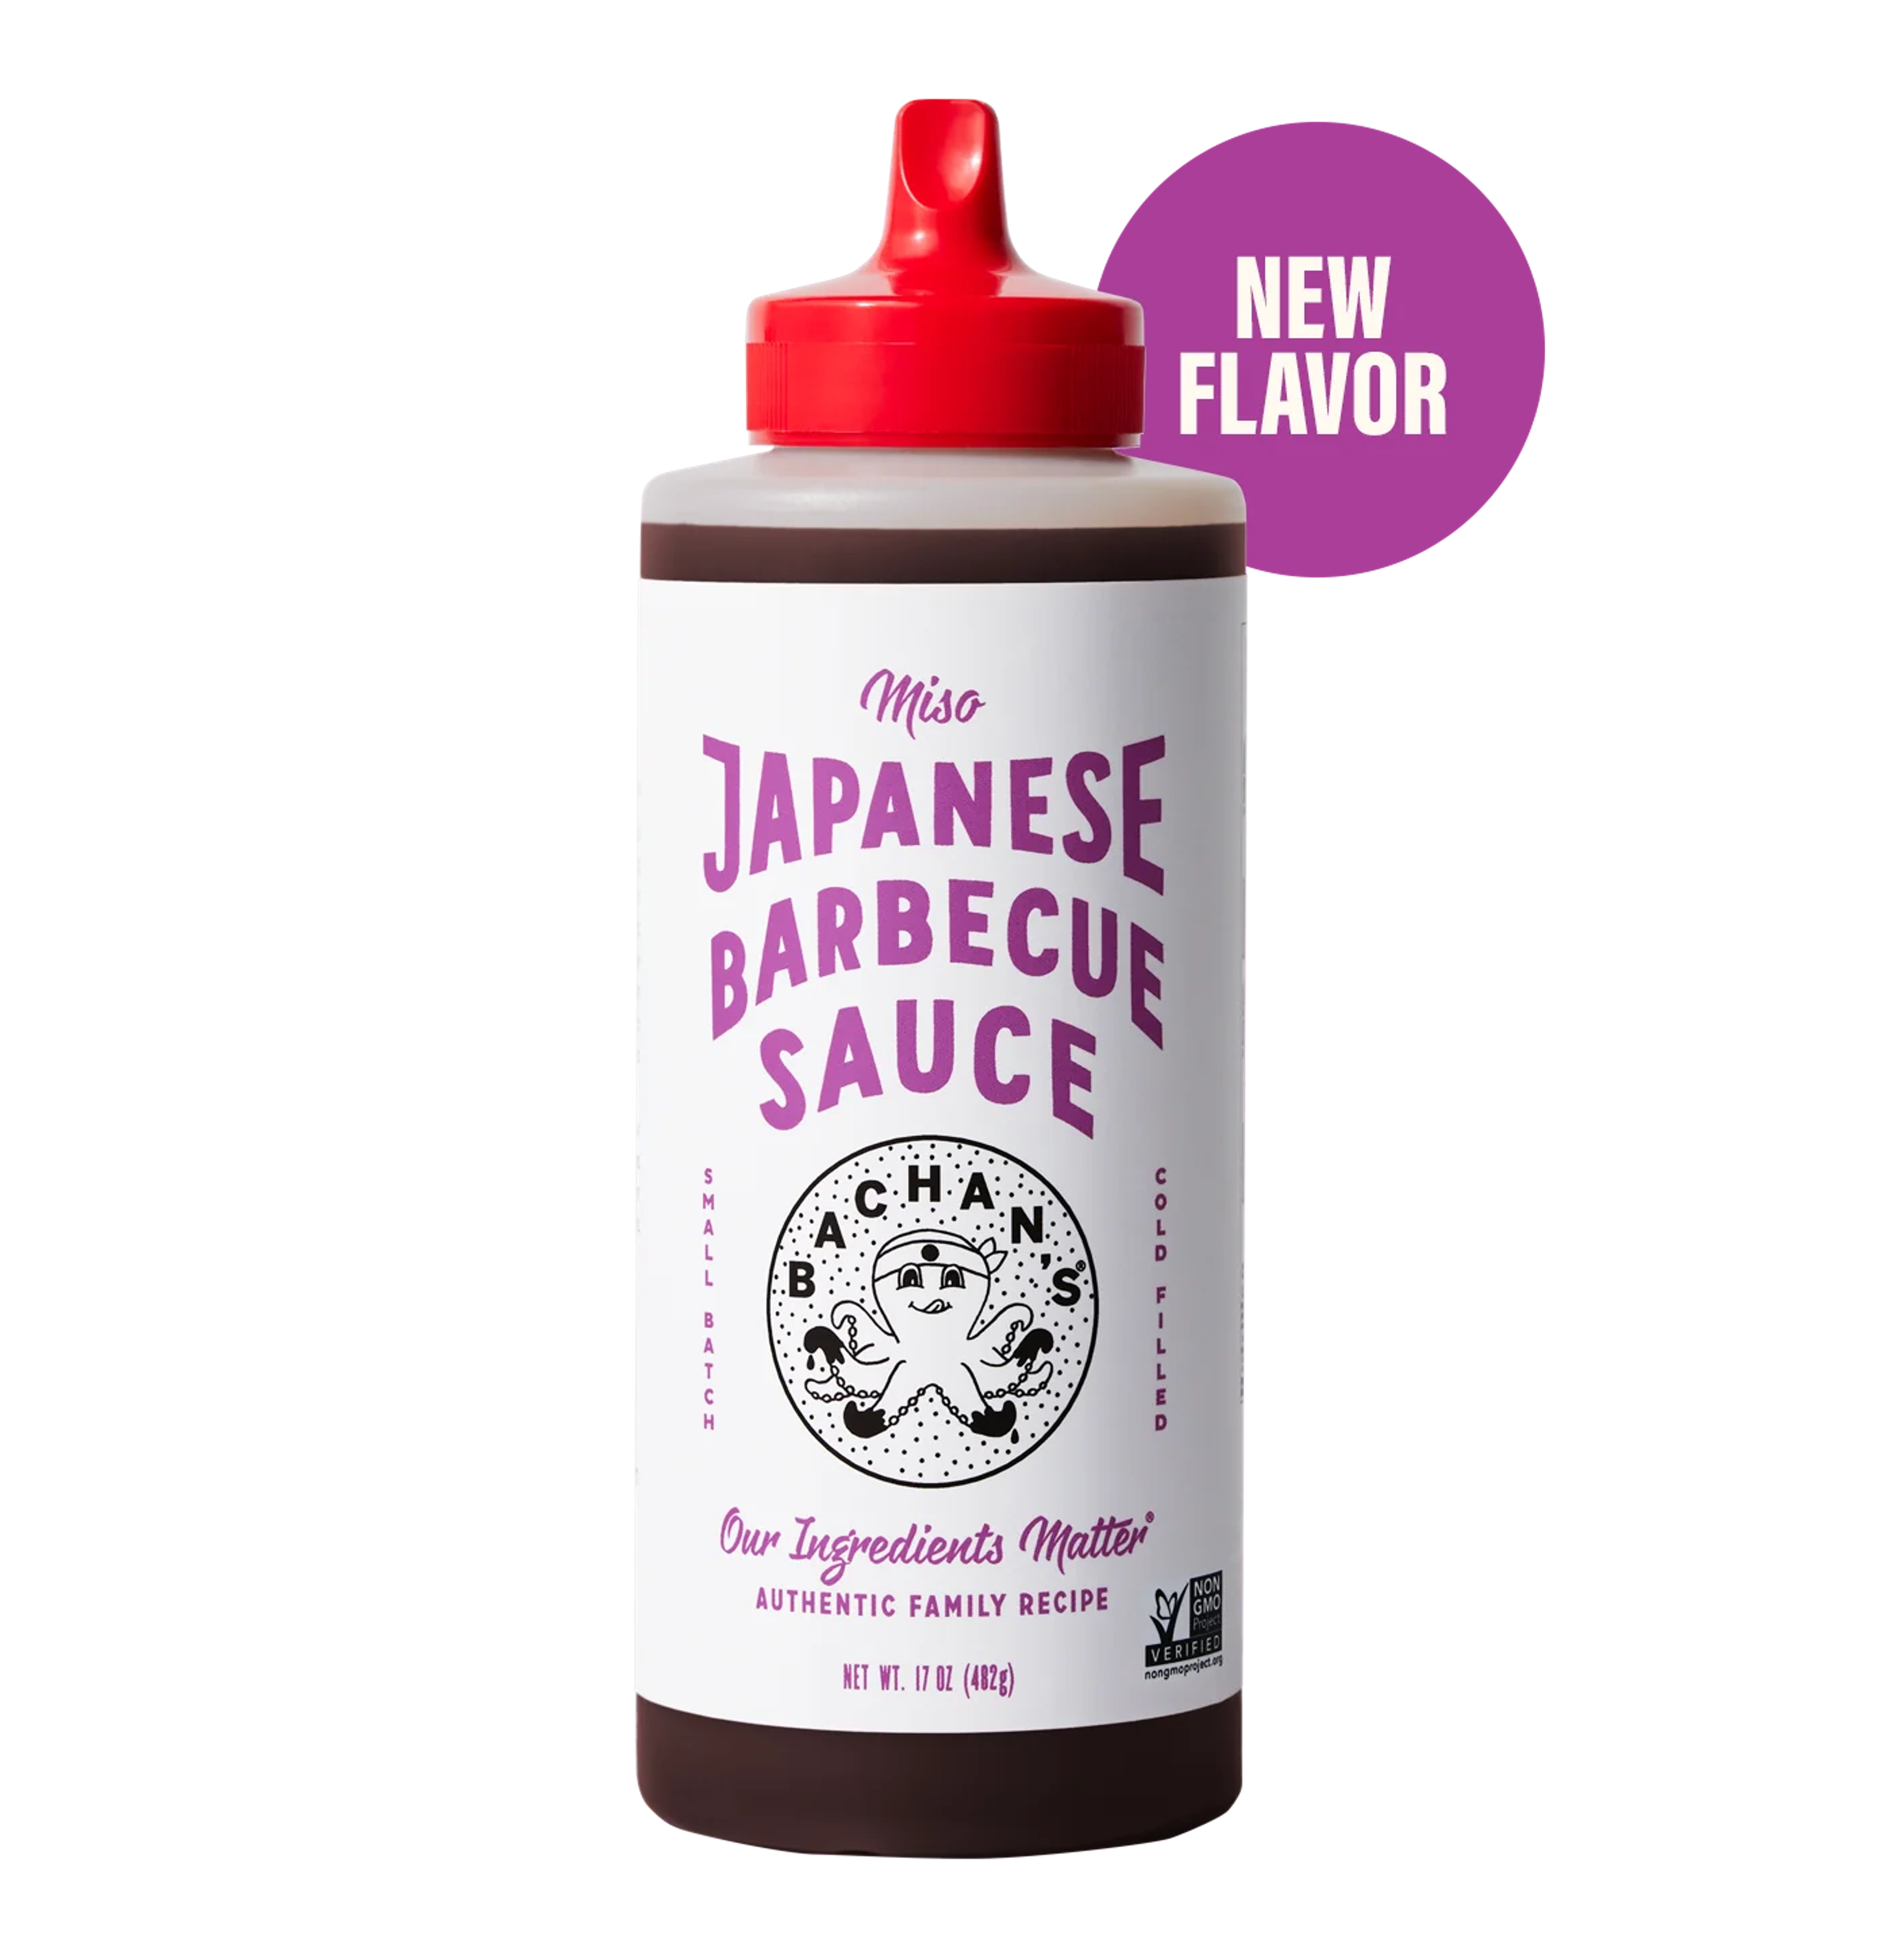 Miso Japanese Barbecue Sauce - 1 Bottle